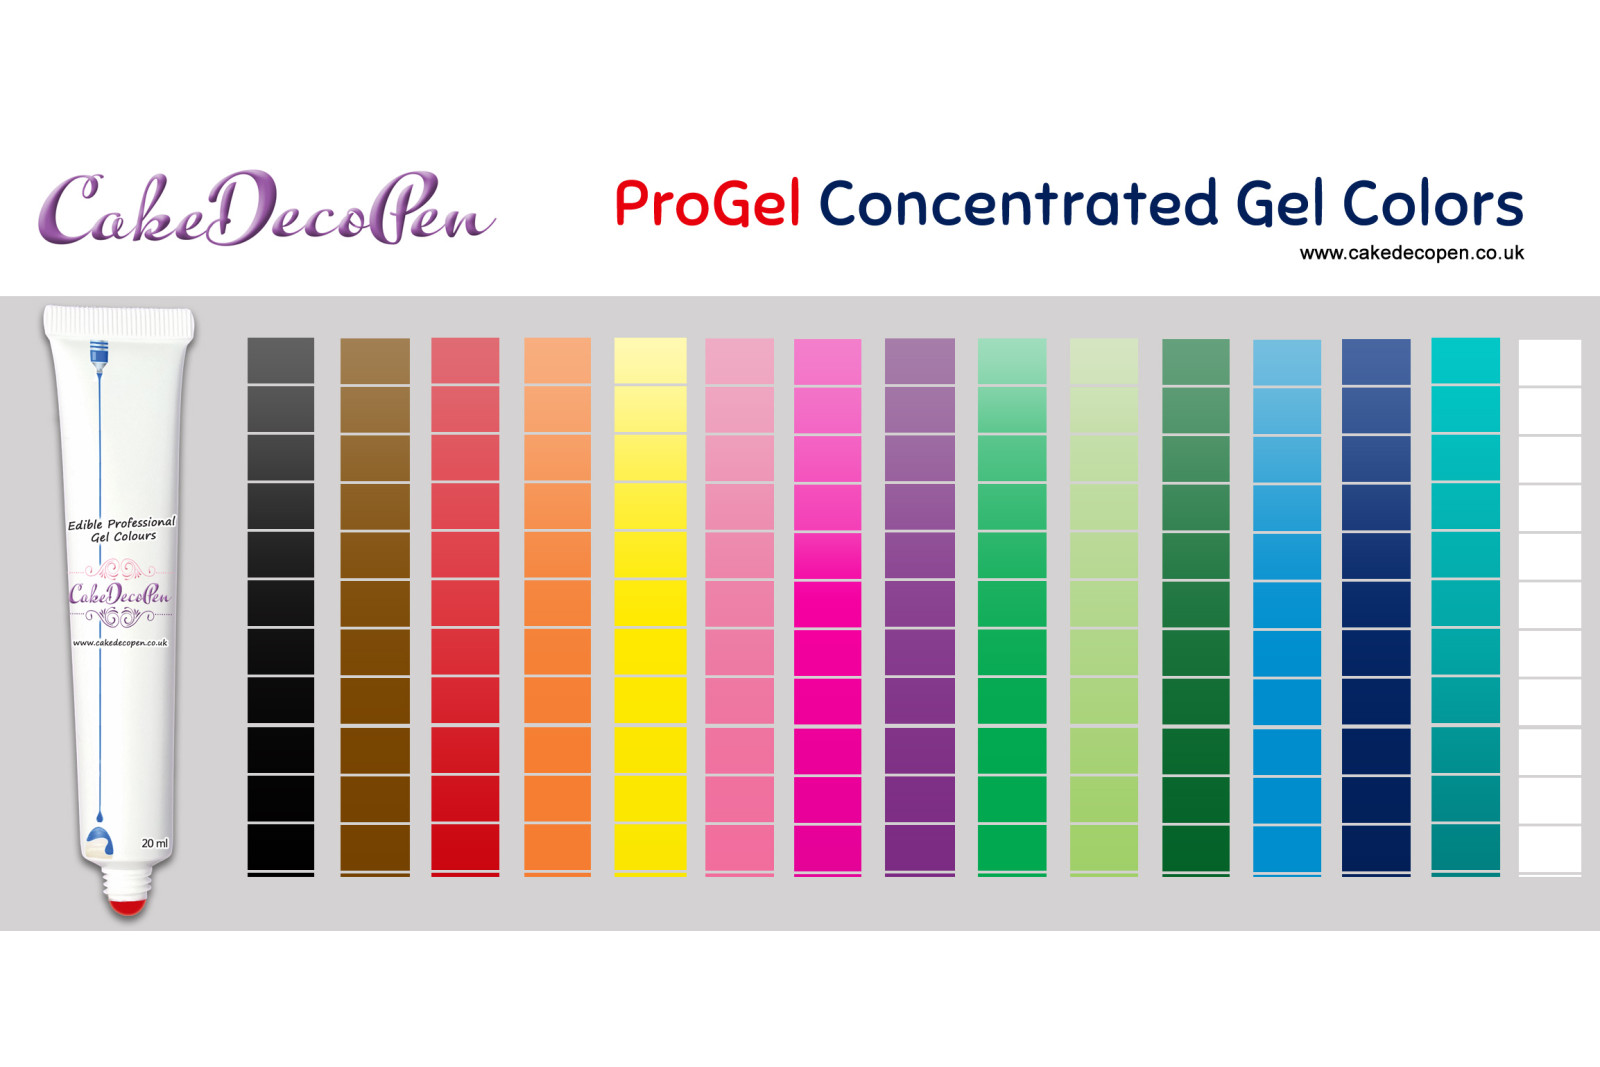 Red | Gel Food Colors | Concentrated ProGel | Cake Decorating | 30 ML